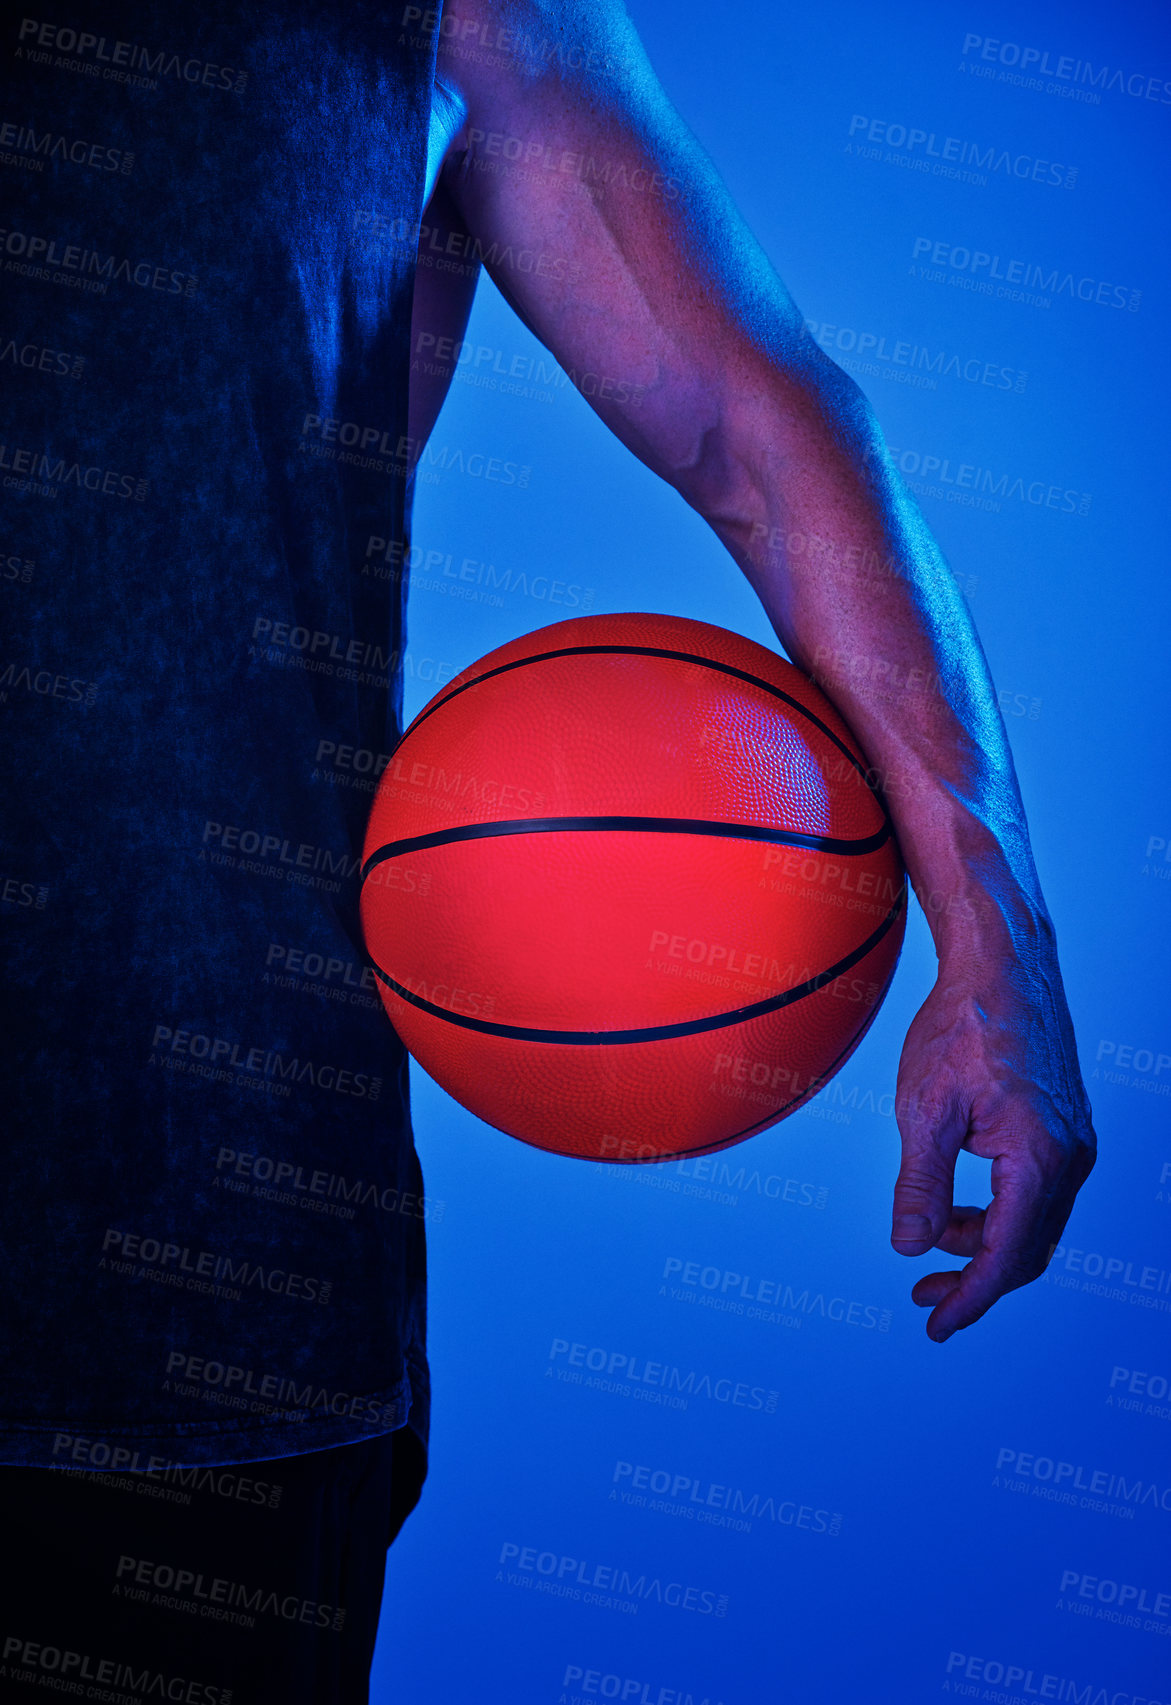 Buy stock photo Blue filtered shot of a sportsman posing with a basketball in the studio